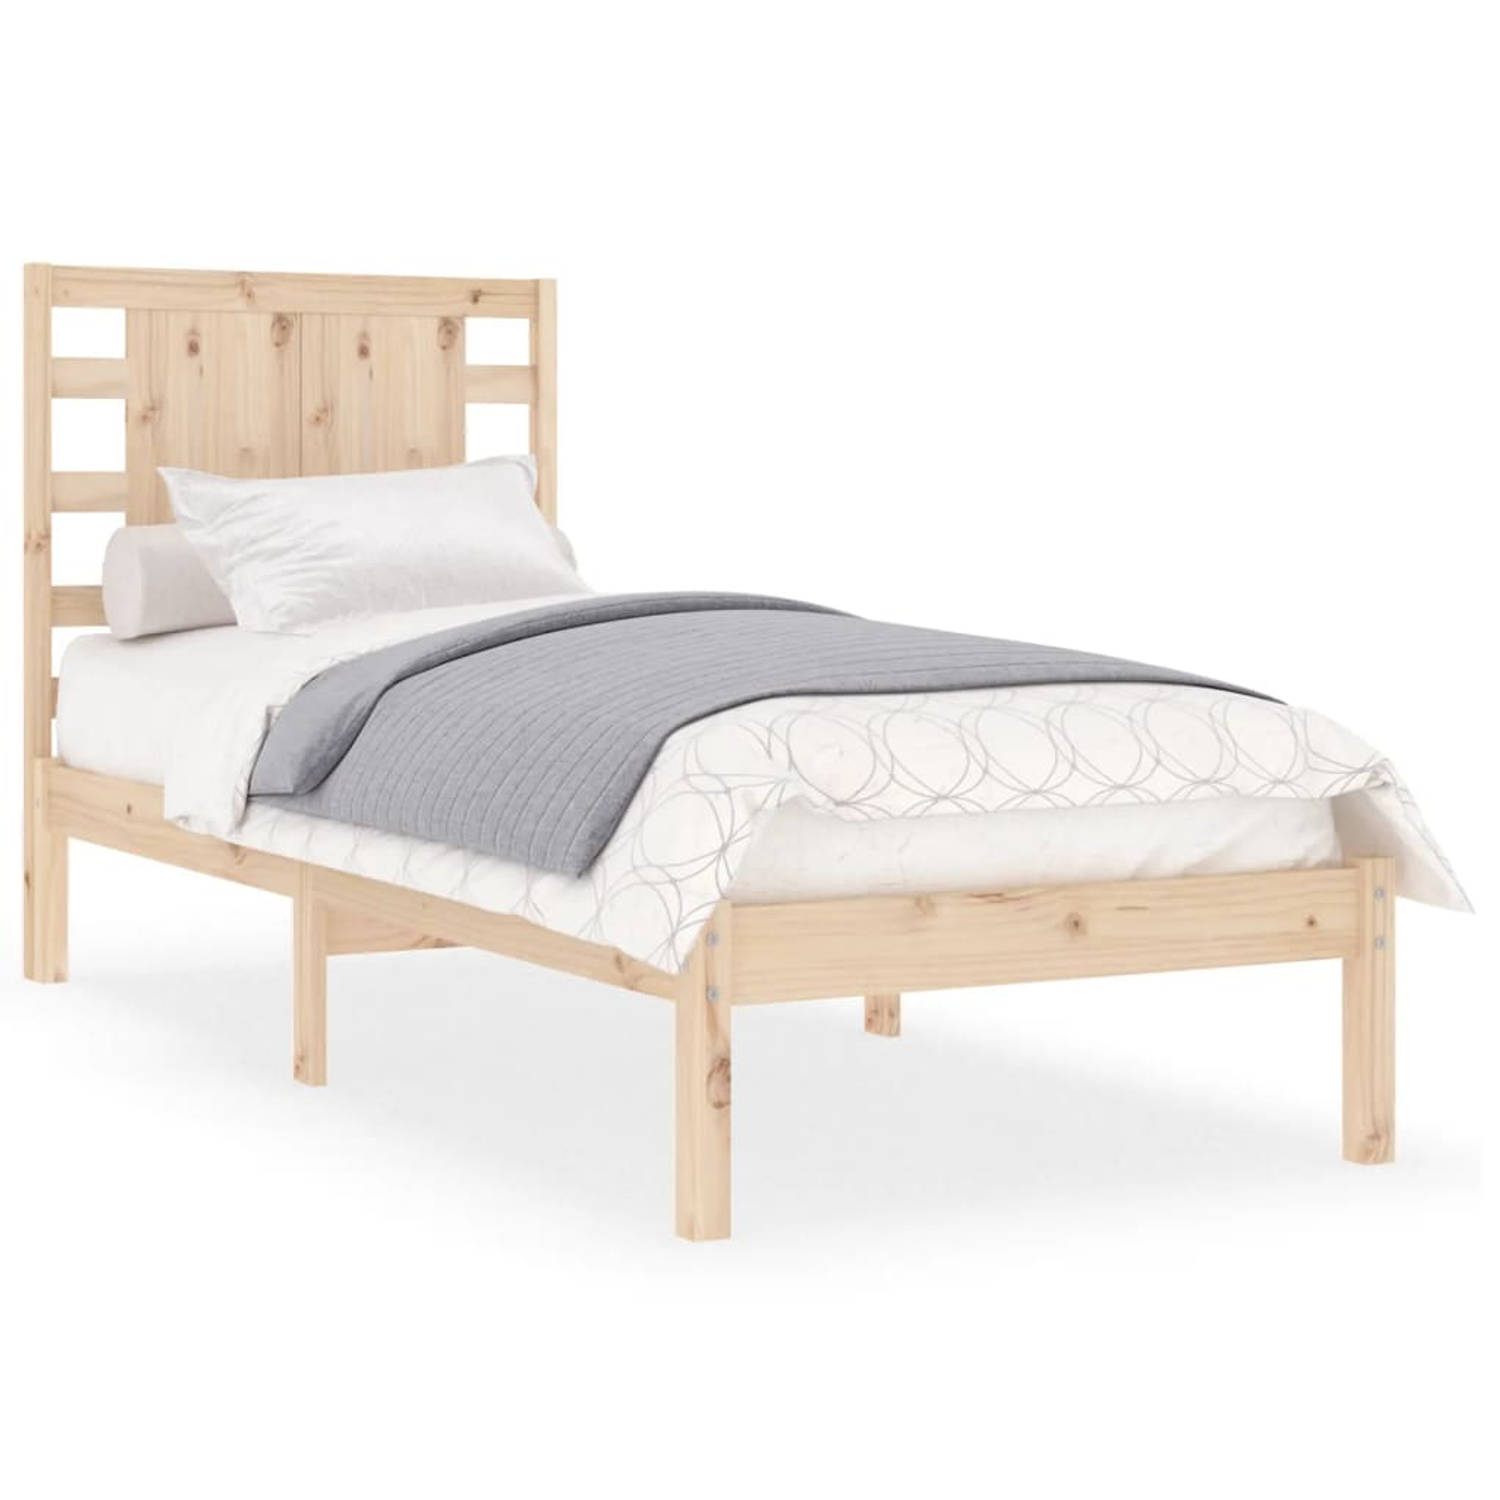 The Living Store Bedframe massief grenenhout 90x200 cm - Bedframe - Bedframes - Eenpersoonsbed - Bed - Bedombouw - Ledikant - Houten Bedframe - Eenpersoonsbedden - Bedden - Bedombo